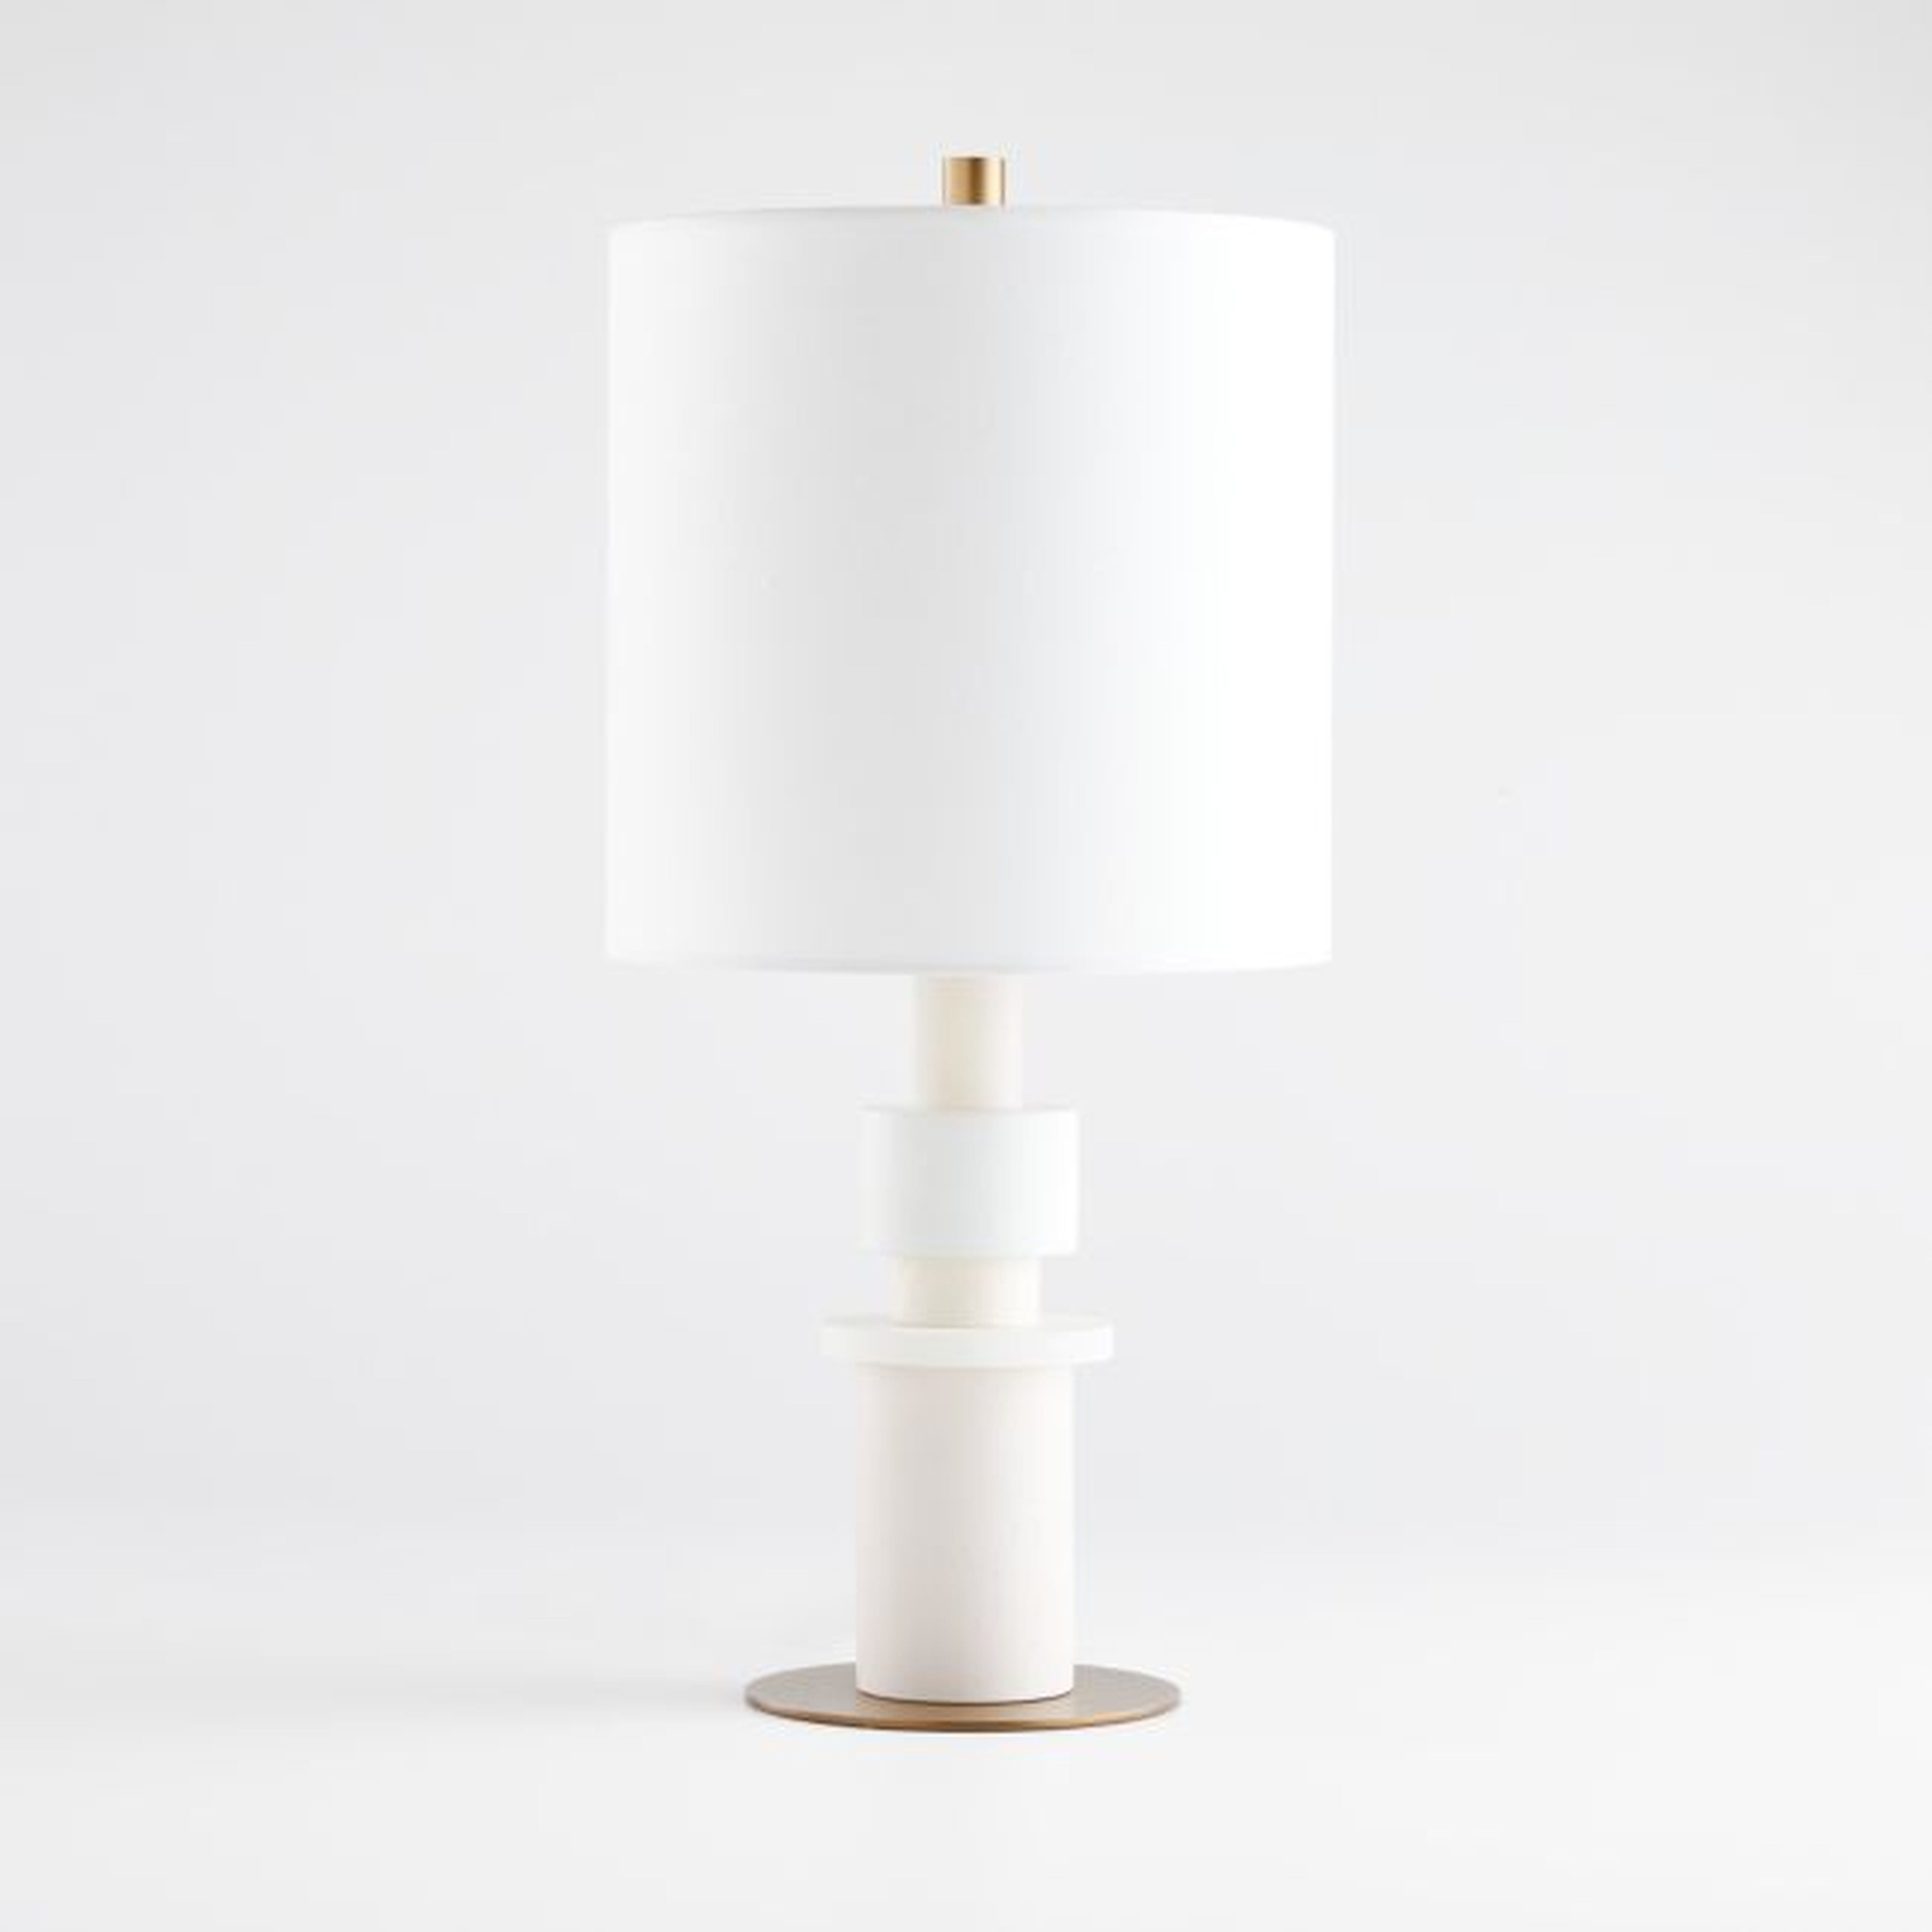 Berkley Ivory Table Lamp - Crate and Barrel